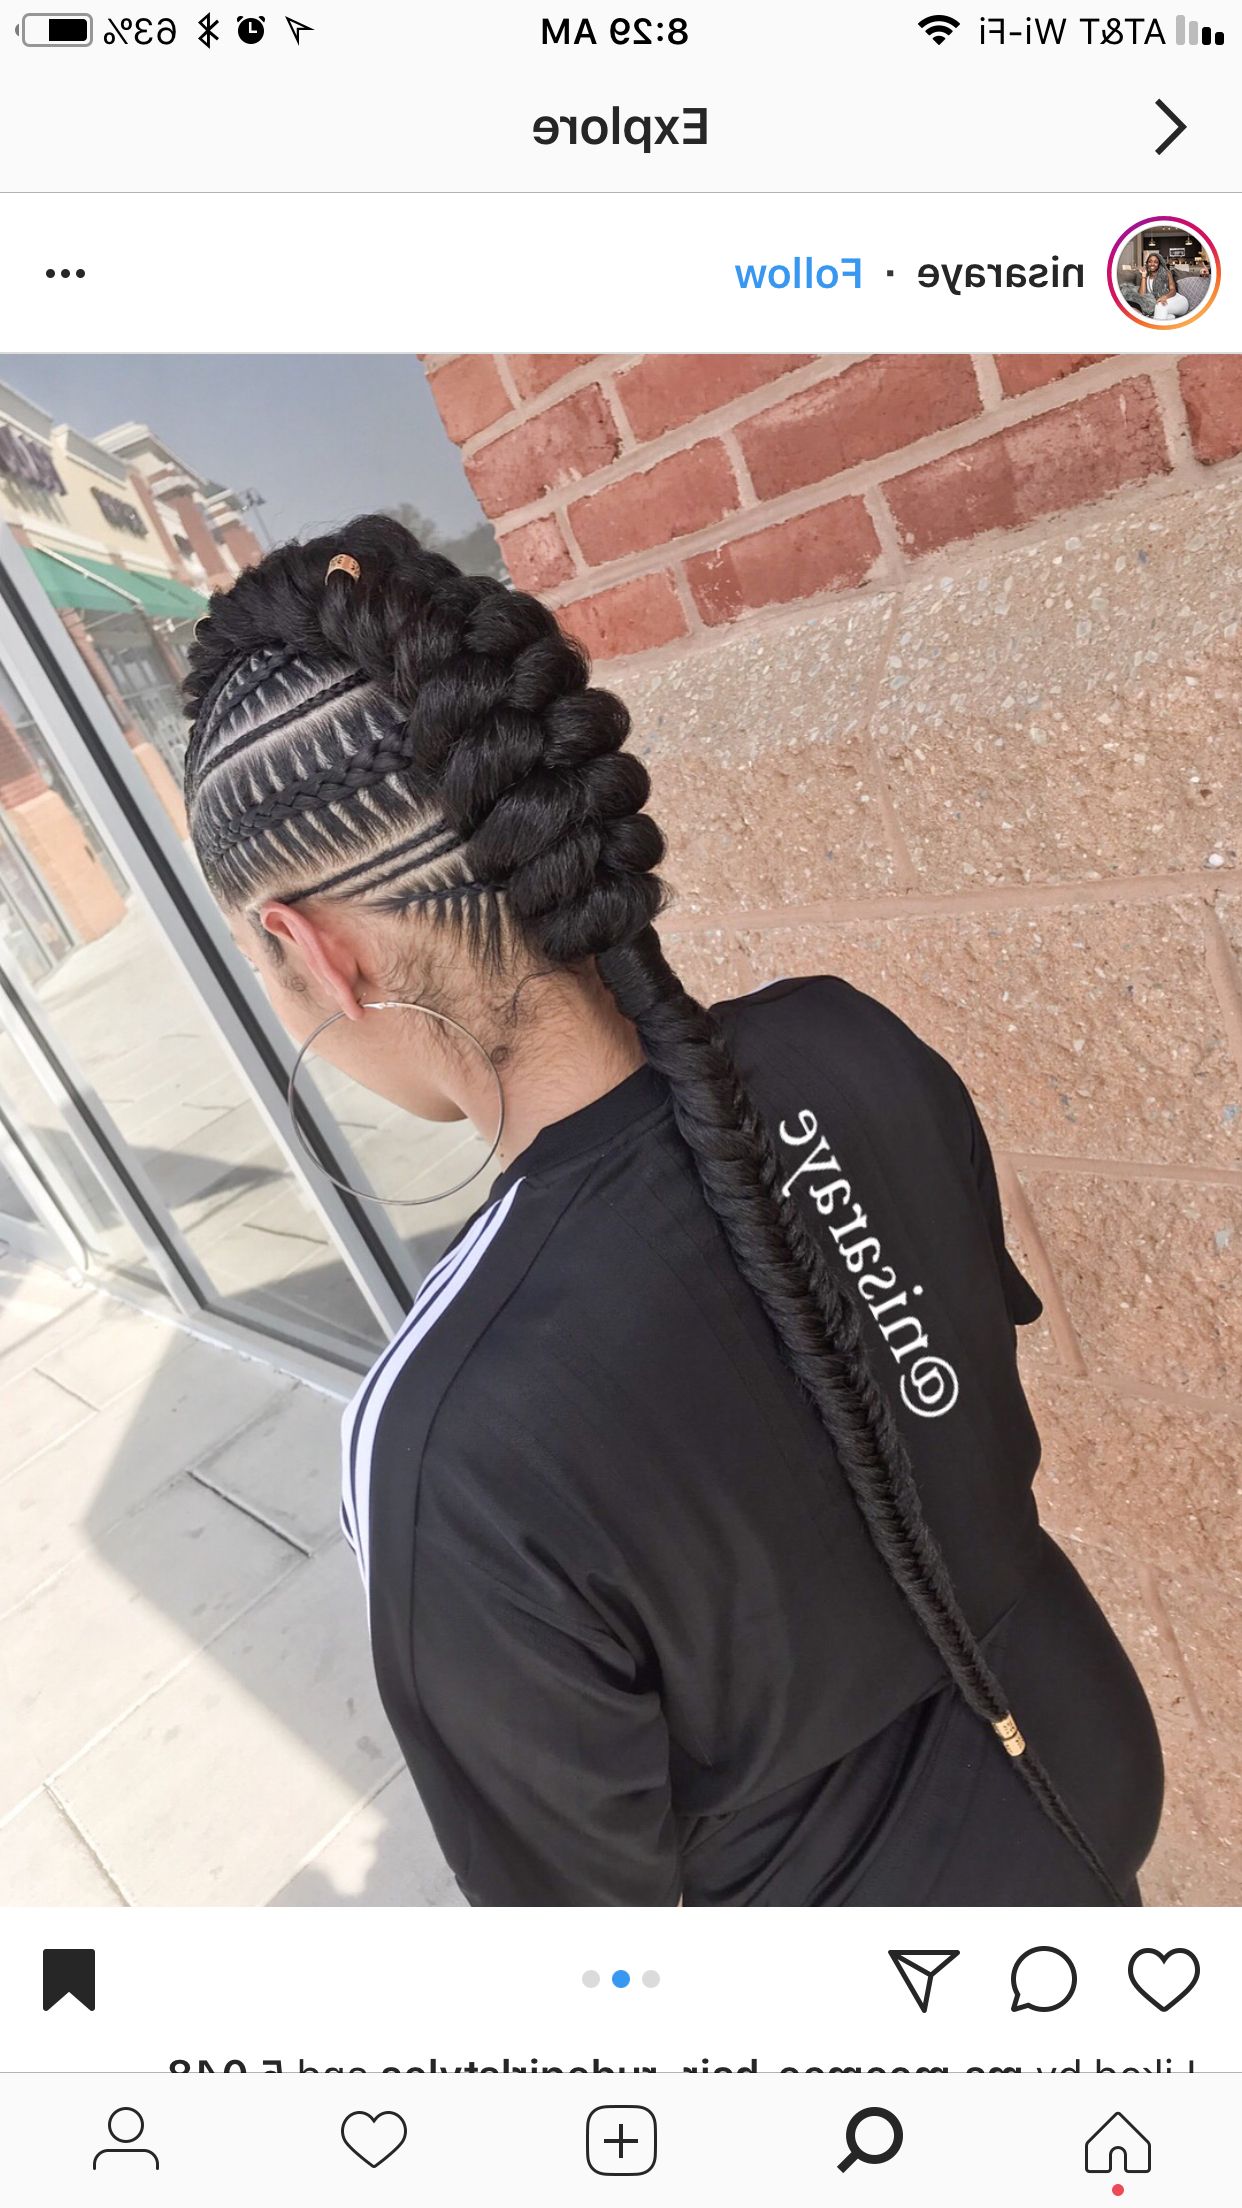 Braided Hairstyles, Hair Throughout Most Up To Date Twist Braided Mohawk Hairstyles (View 11 of 20)